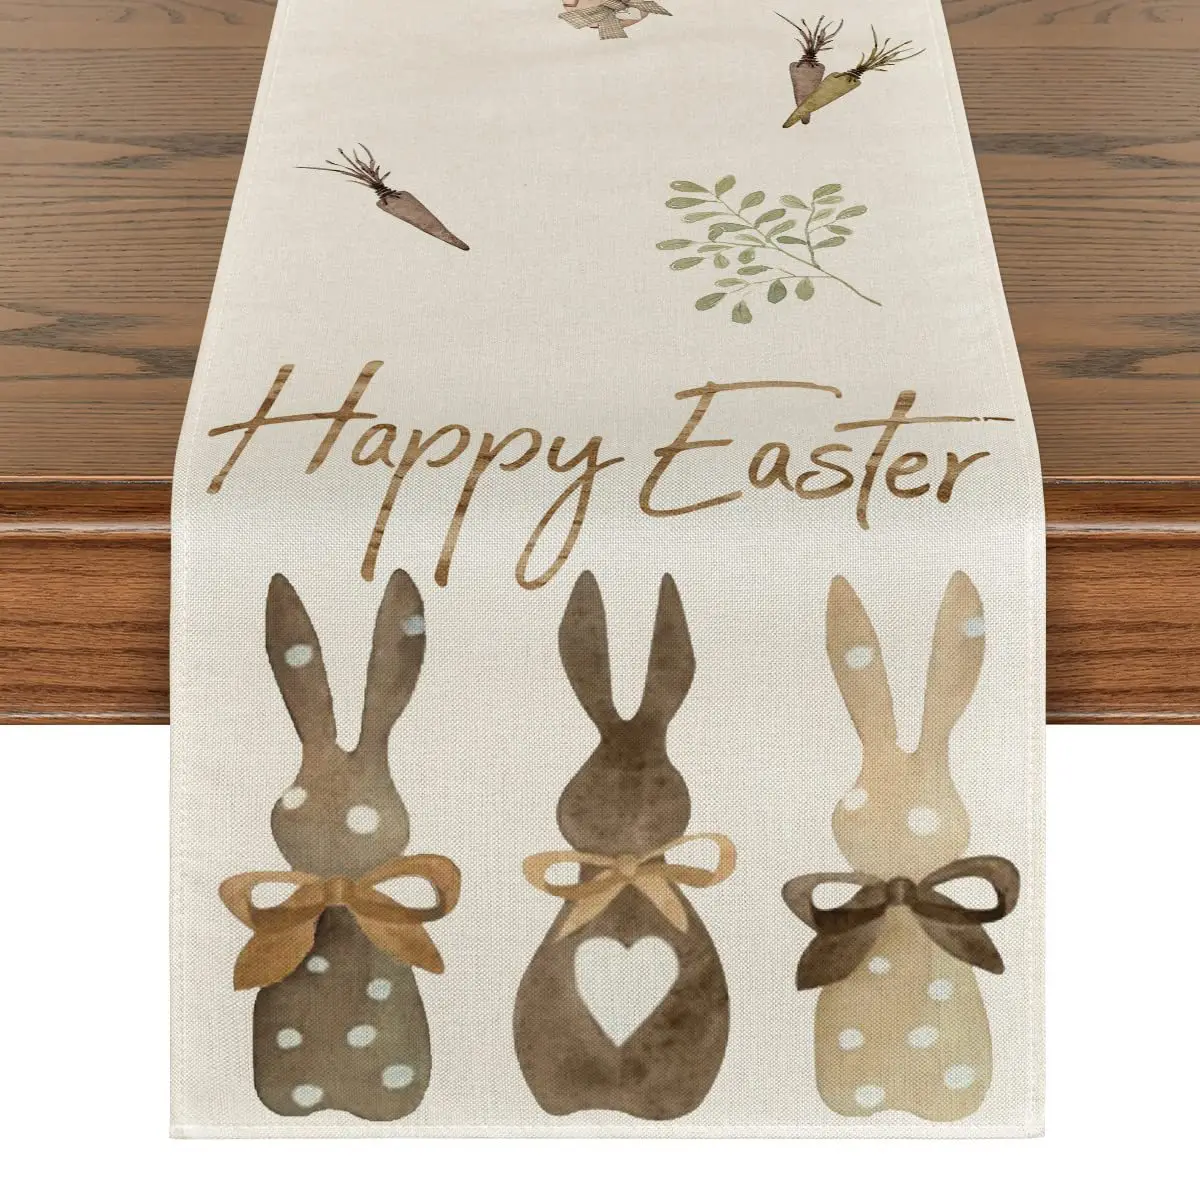 

bunny Carrots Happy Easter table runner flag with Placemat for Dining Table Decor Spring Tablecloth Easter Rabbit Table cover